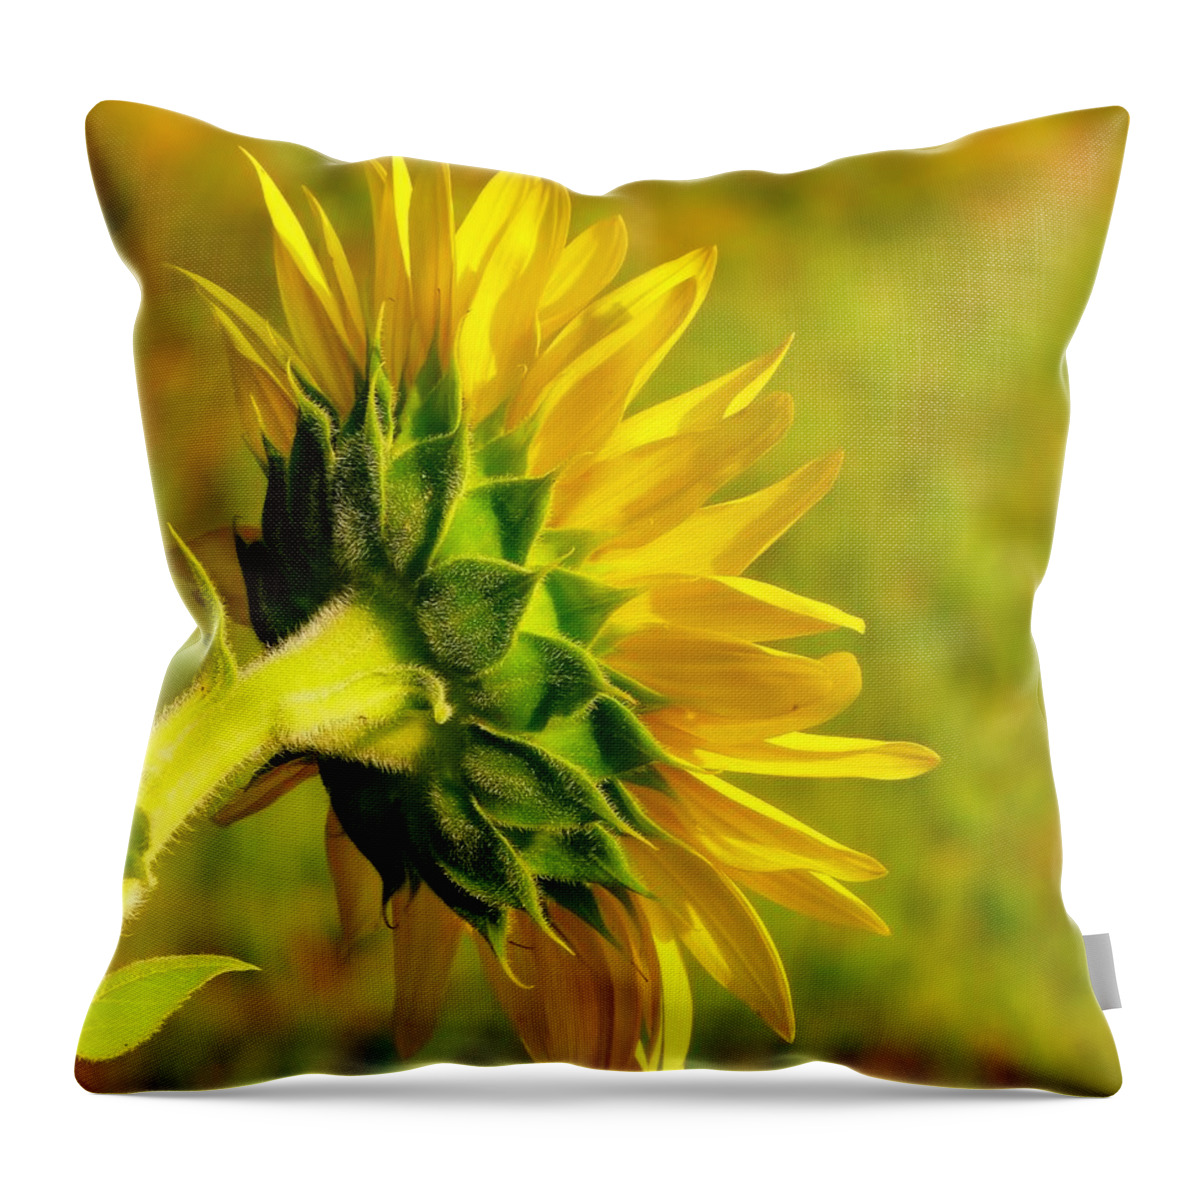 Sunflower Throw Pillow featuring the photograph Sunny Flower by MTBobbins Photography